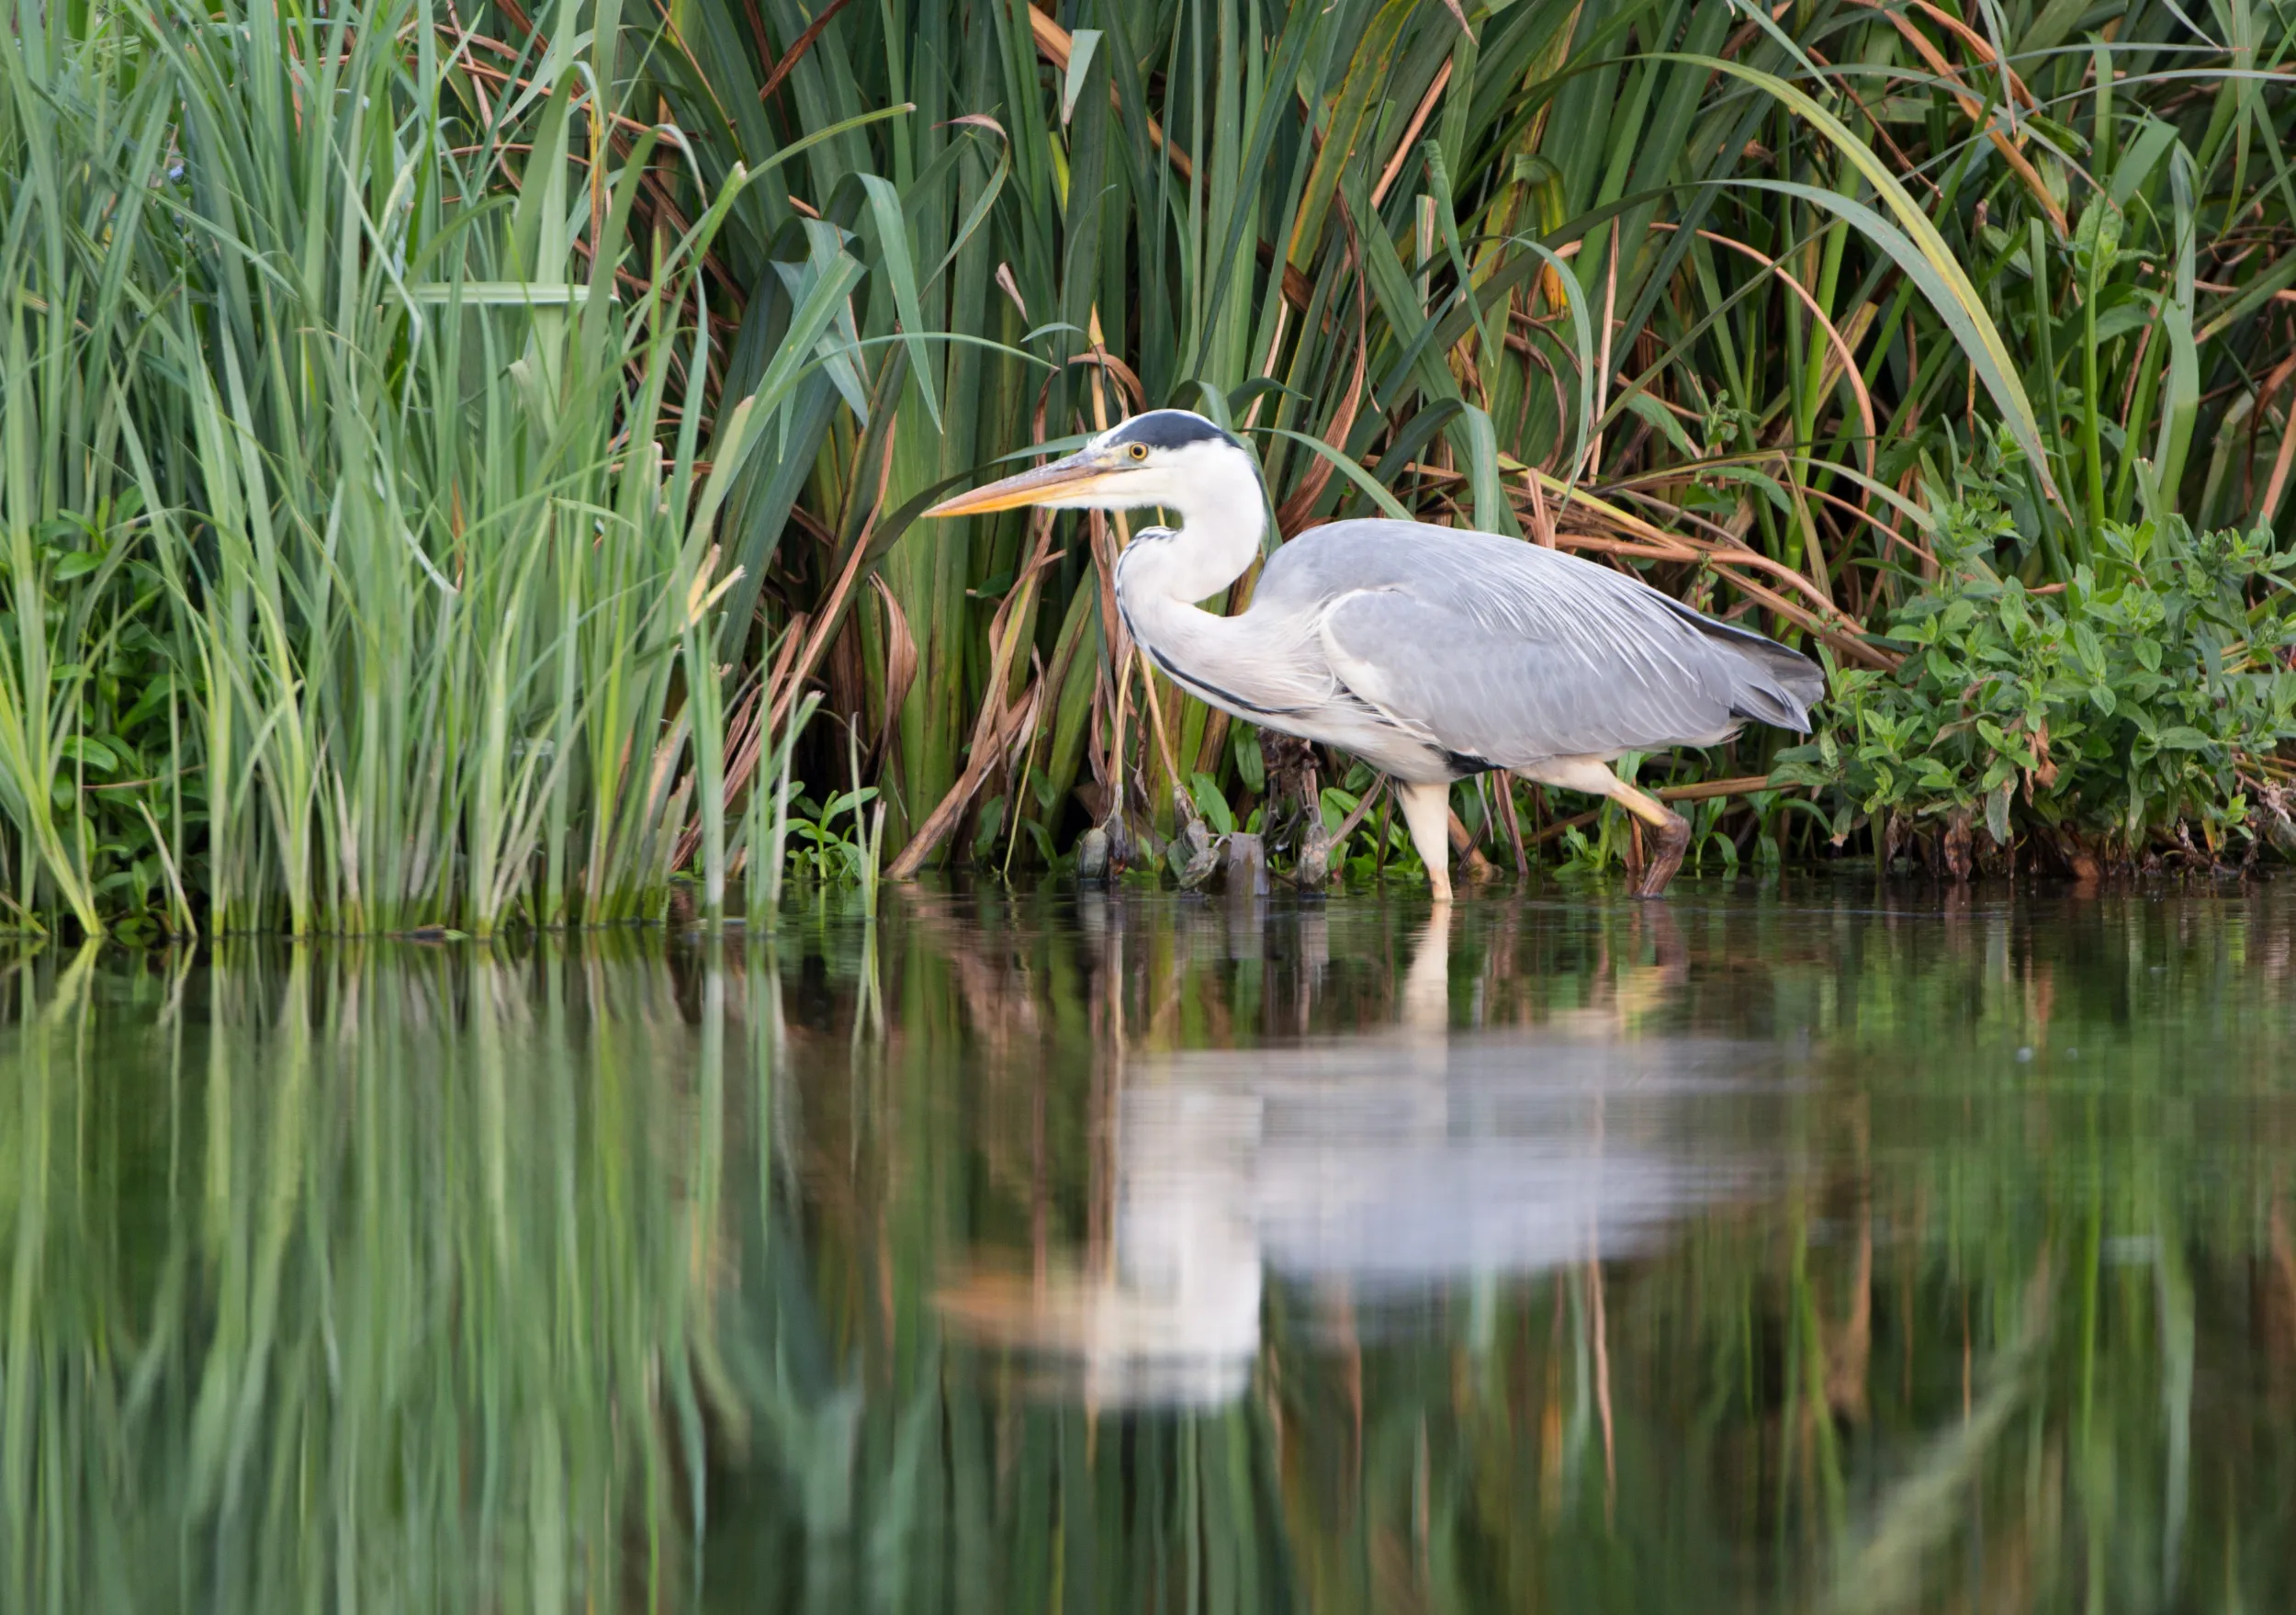 A Grey Heron wading through shallow water its reflection is mirrored back